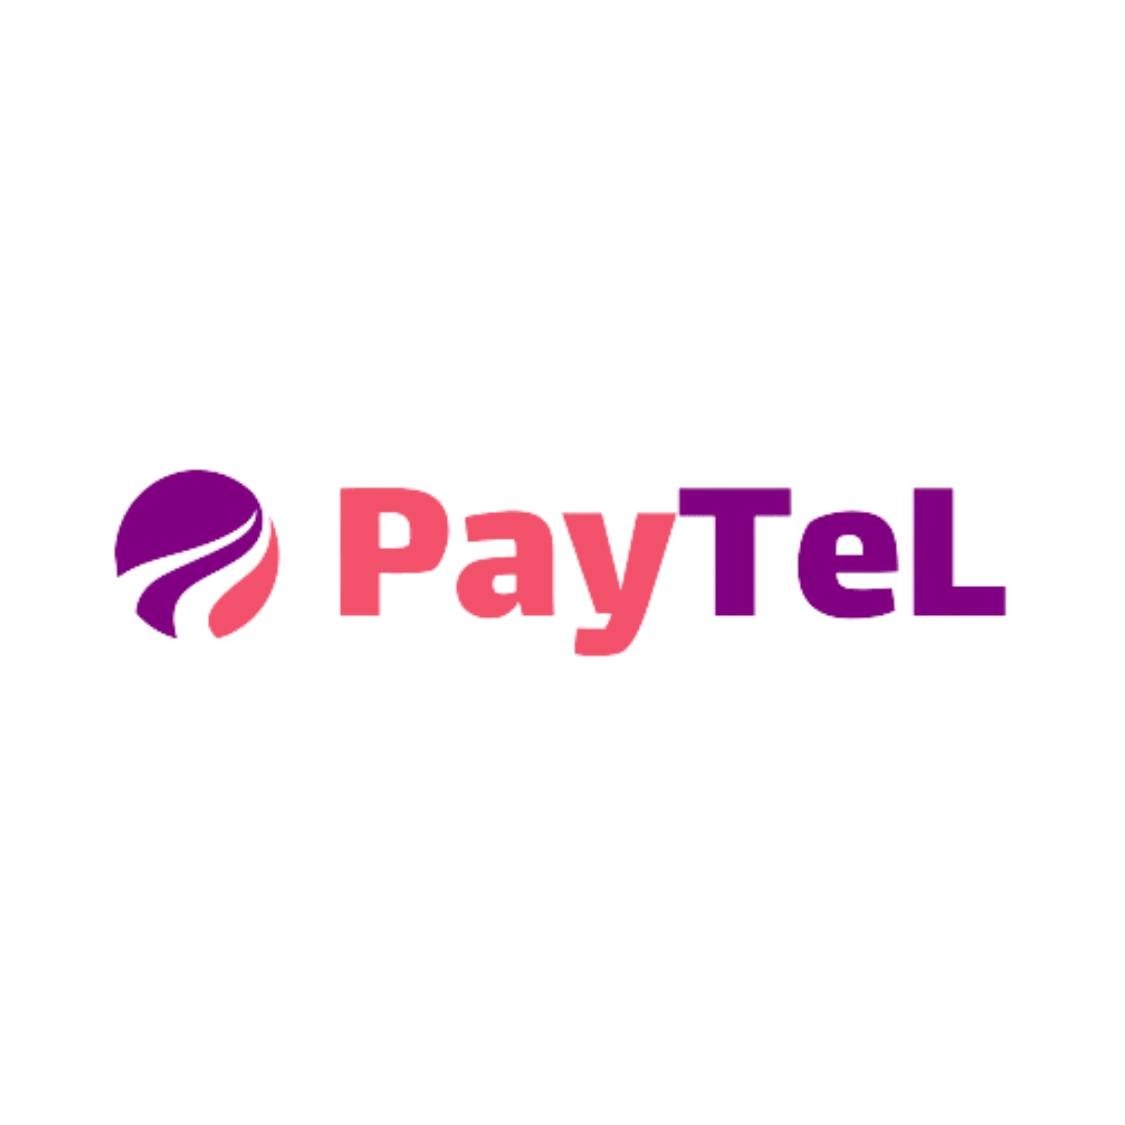 Best payment gateway service provider in India